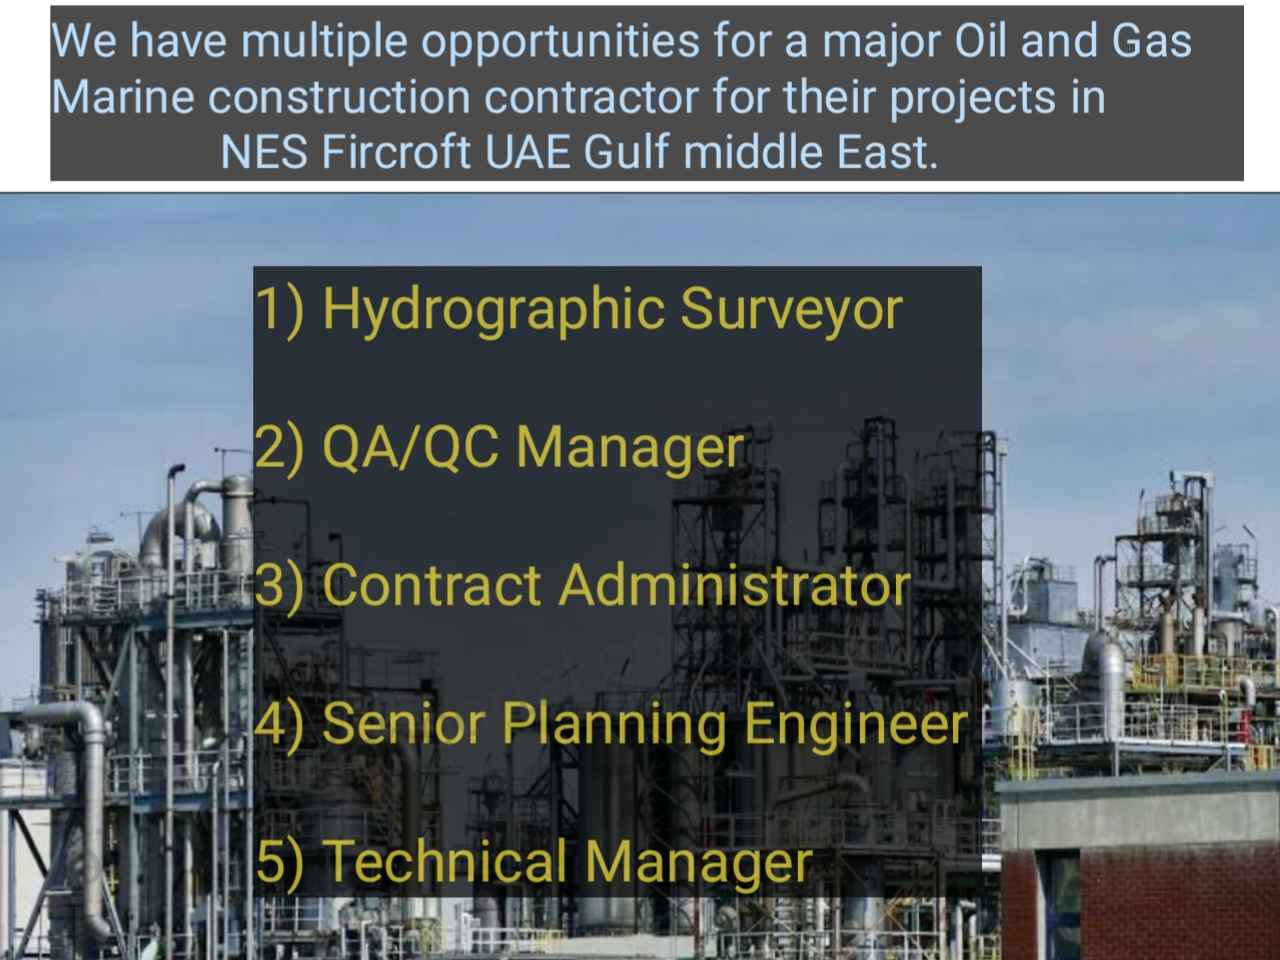 We have multiple opportunities for a major Oil and Gas Marine construction contractor for their projects in NES Fircroft UAE Gulf middle East.